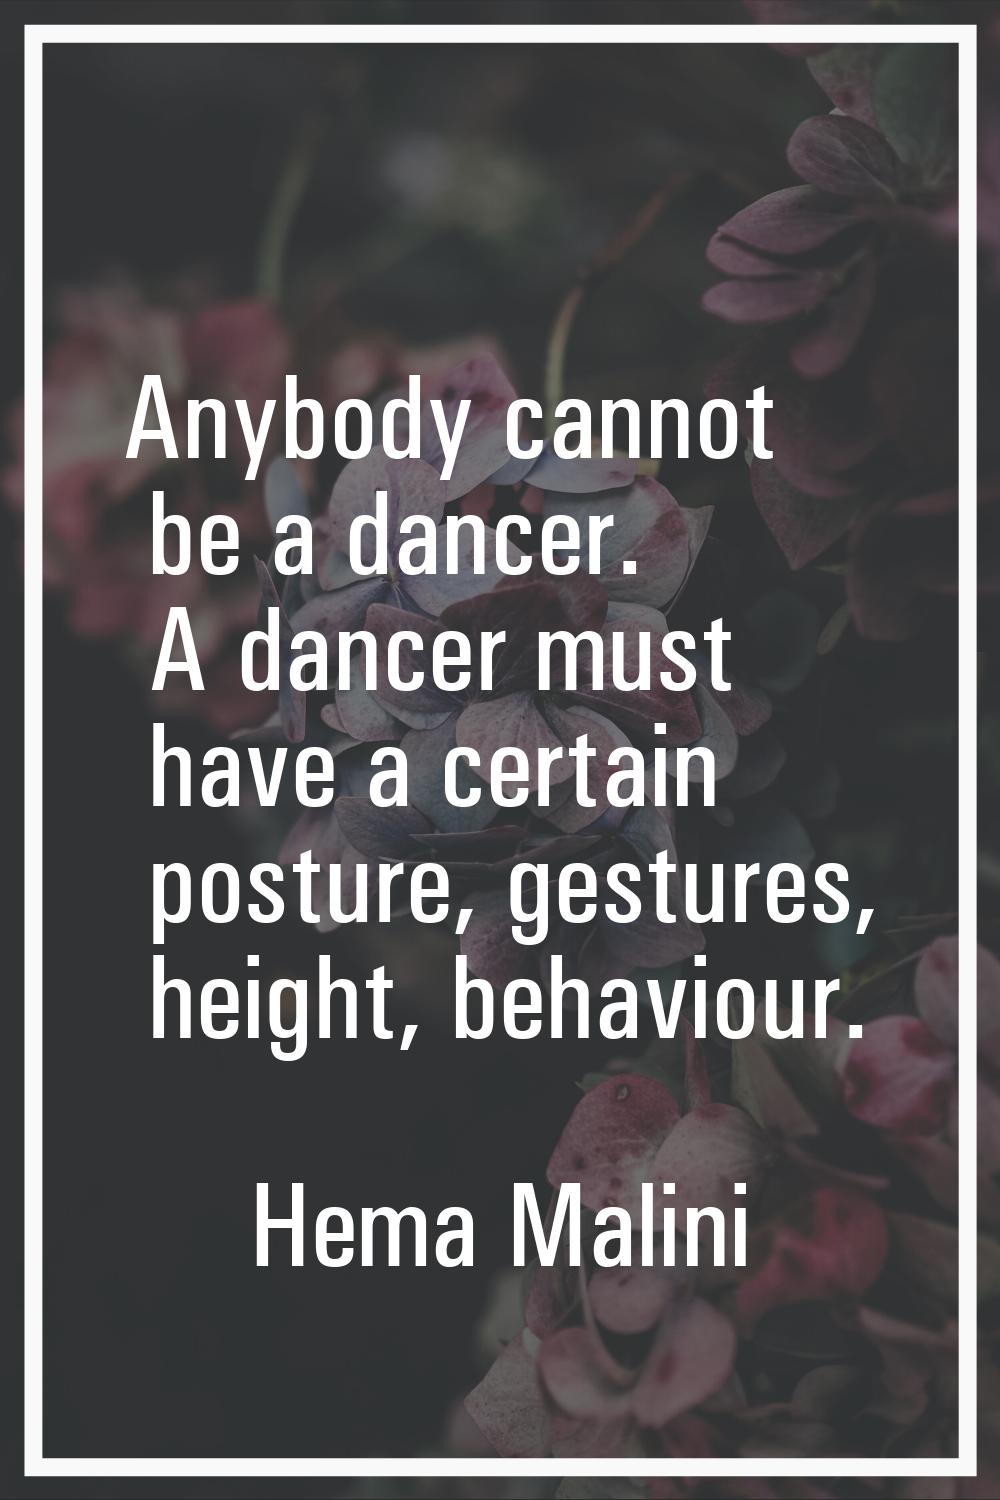 Anybody cannot be a dancer. A dancer must have a certain posture, gestures, height, behaviour.